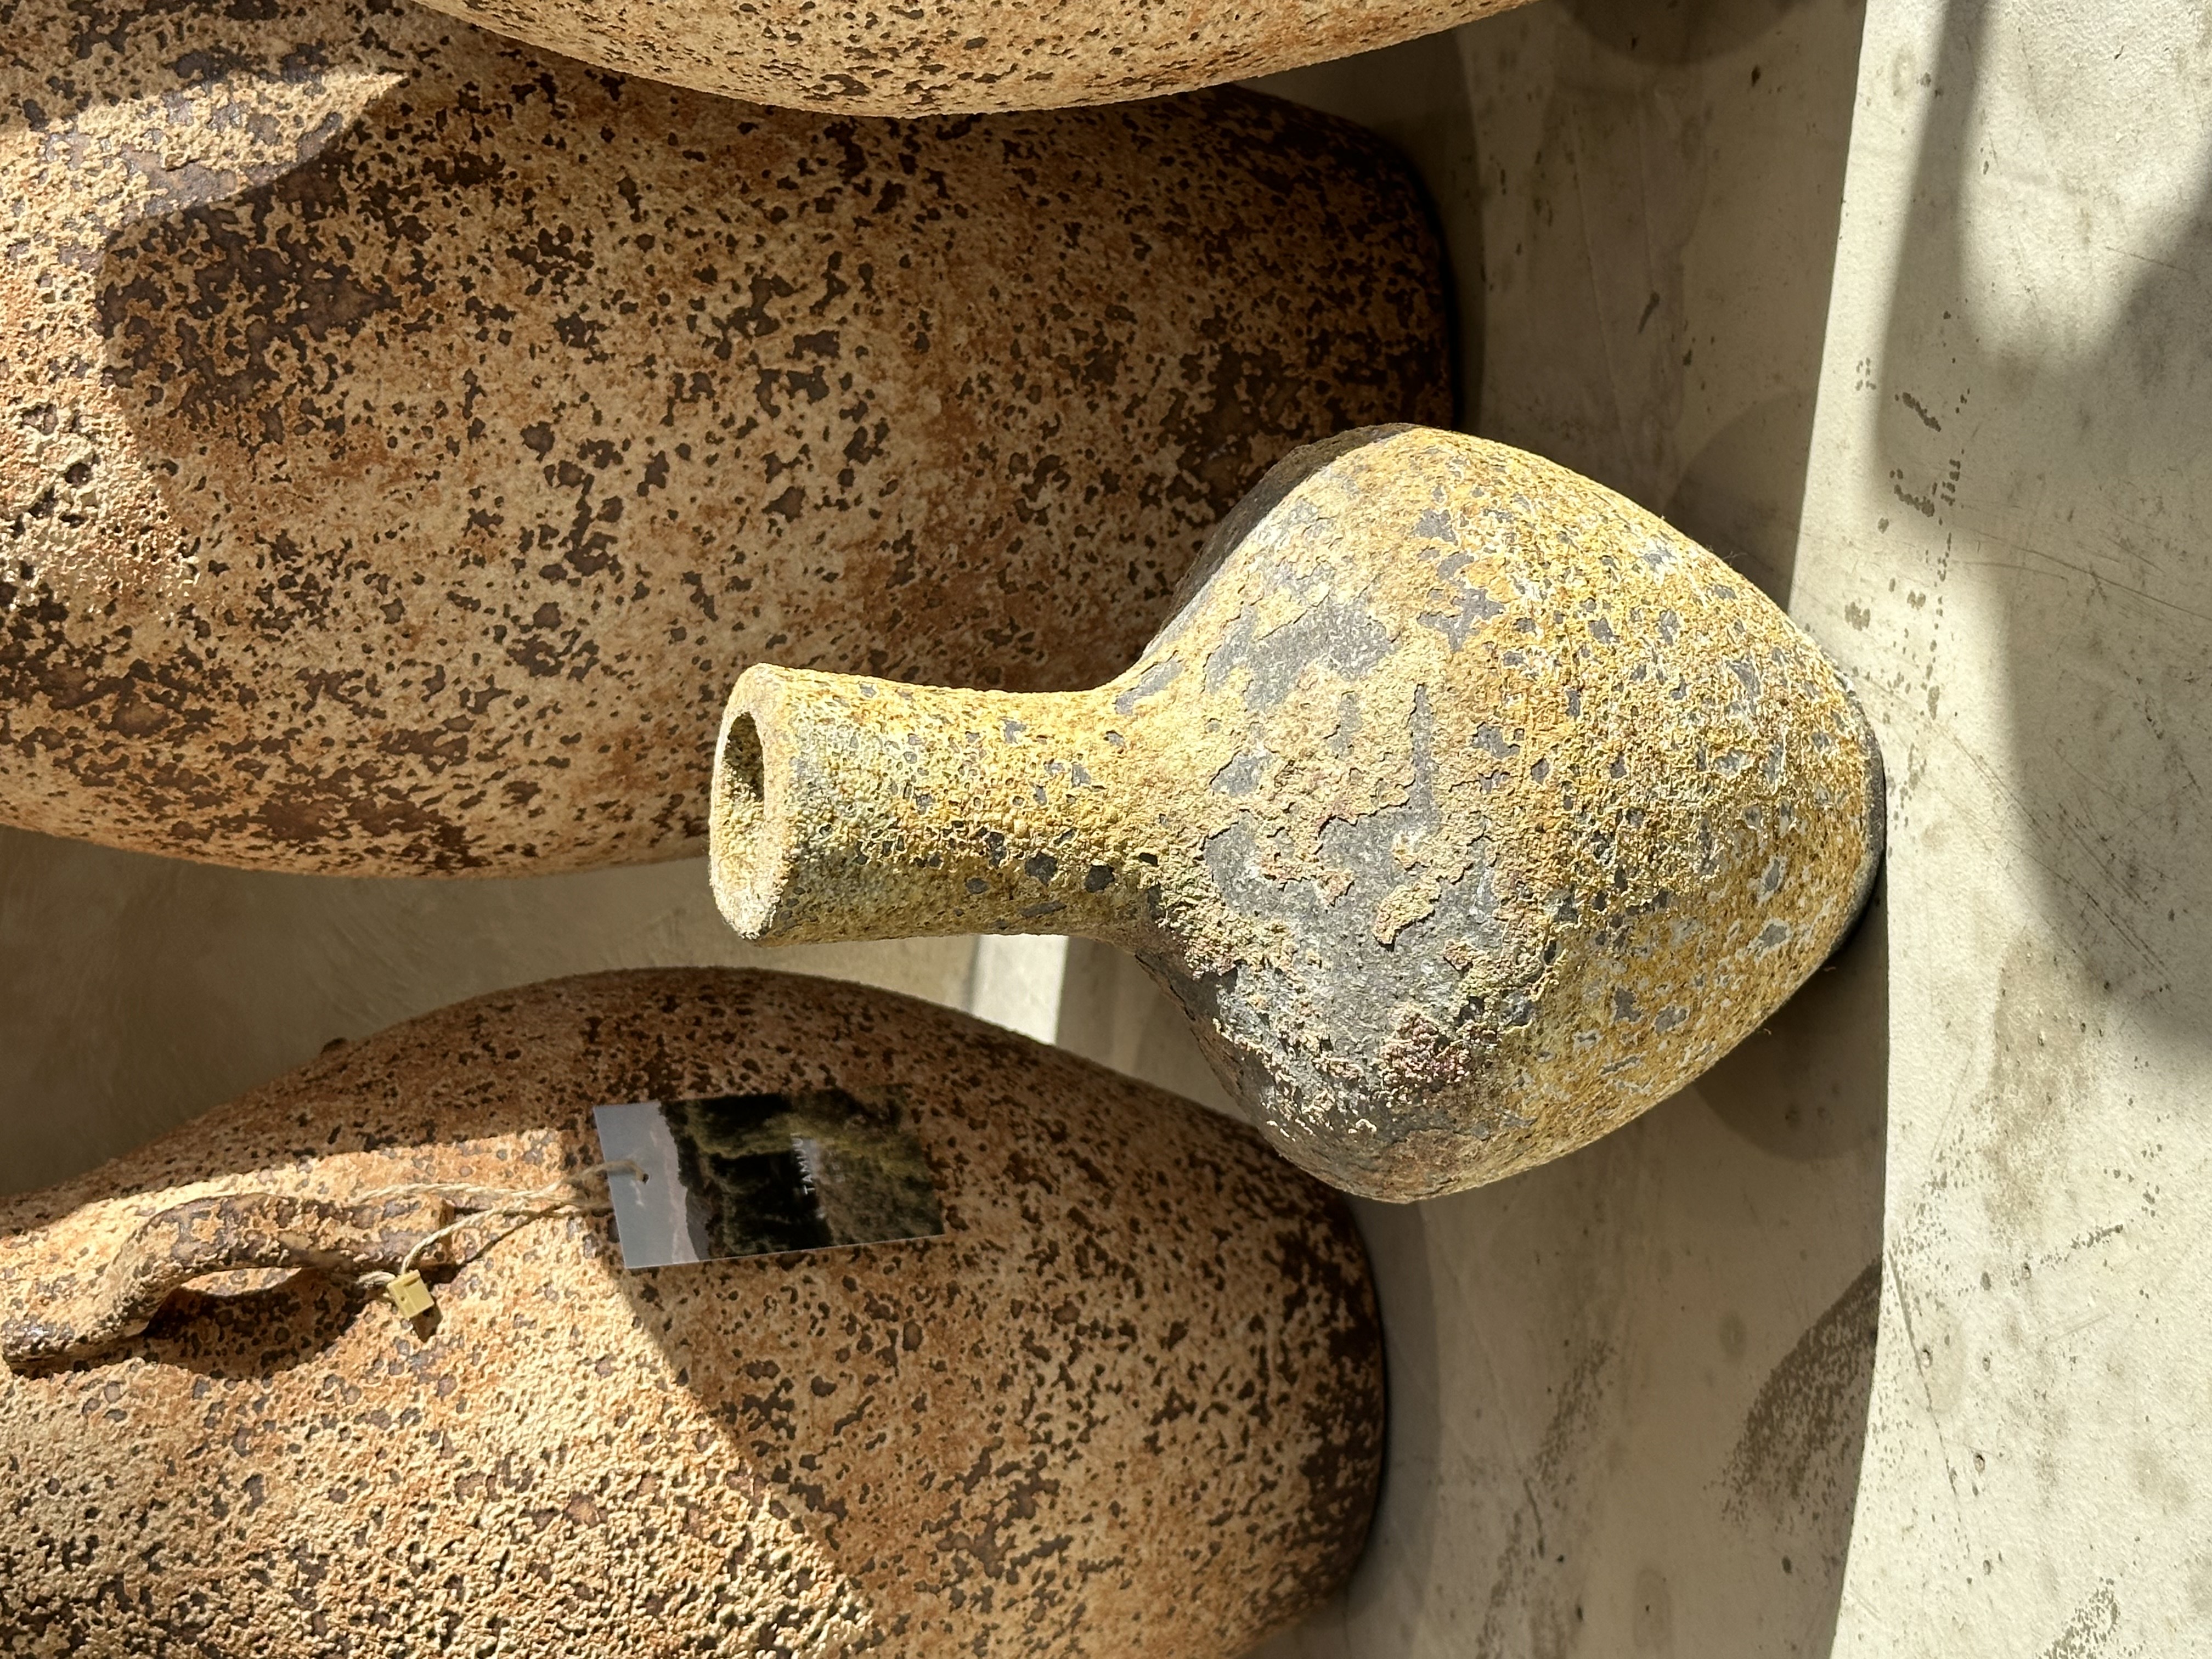 Rough textured bottle pottery